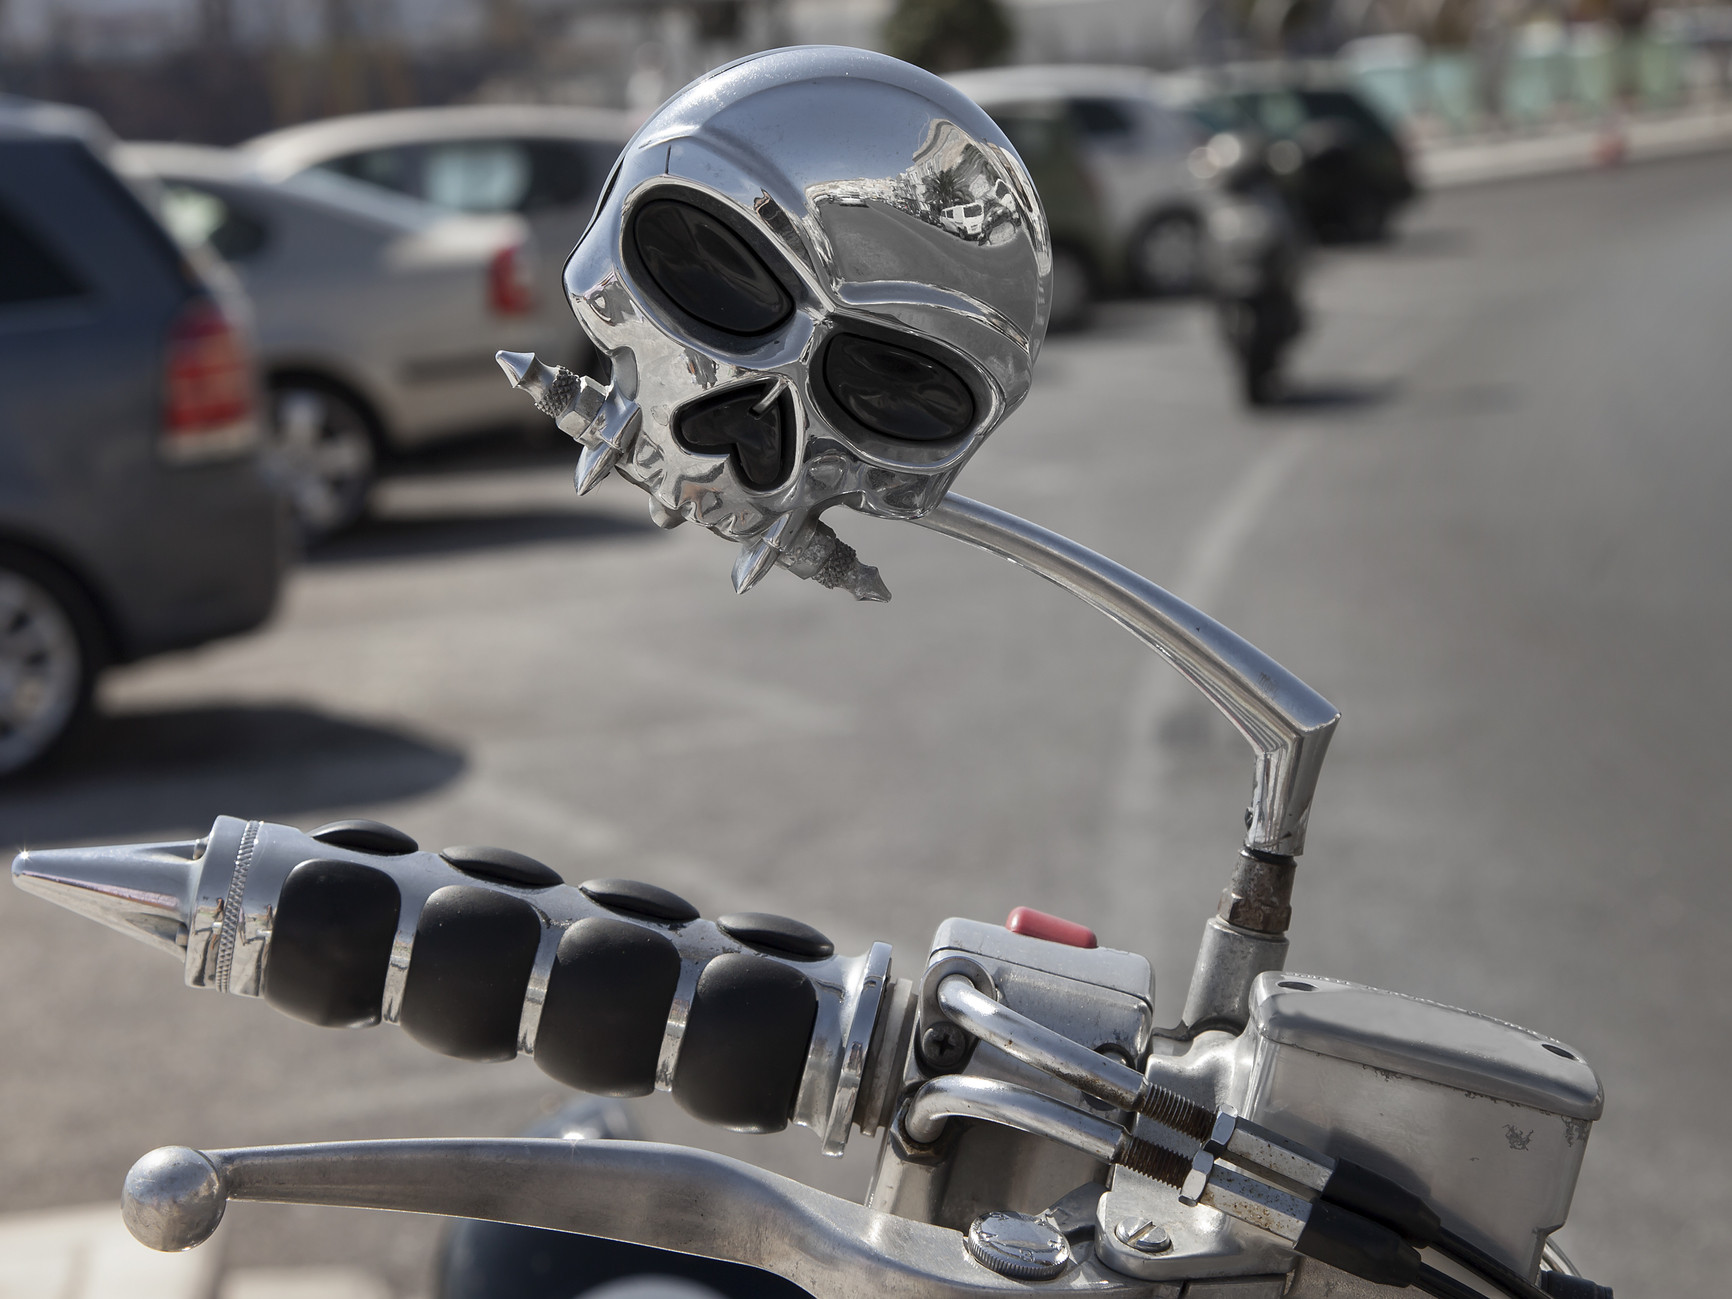 Motorcycle ornament